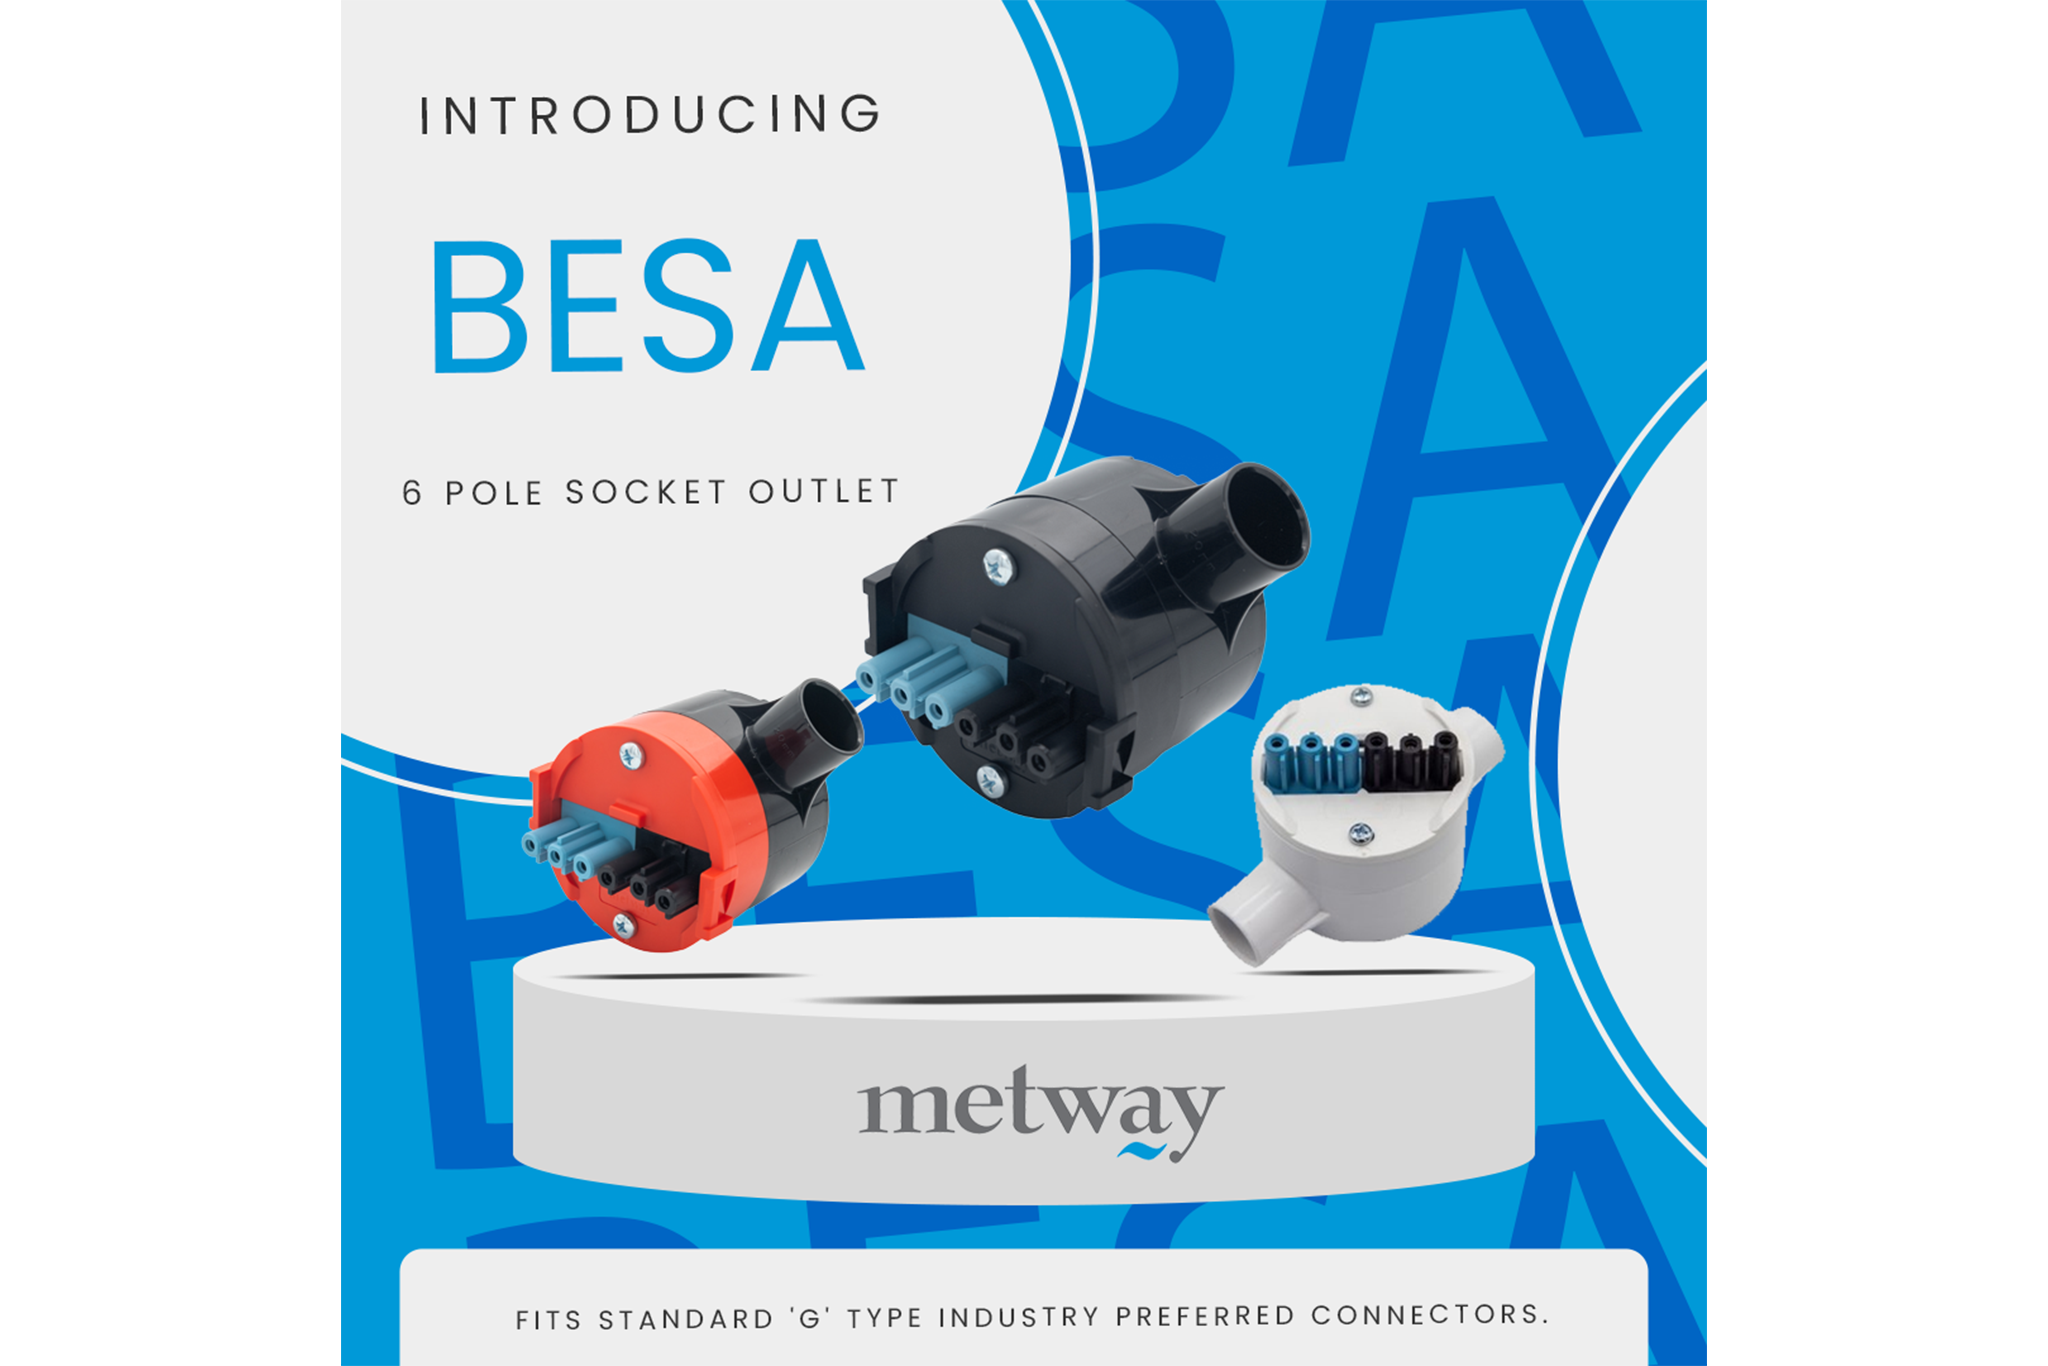 We are thrilled to announce that, due to overwhelming customer demand, Metway is expanding its line of BESA sockets